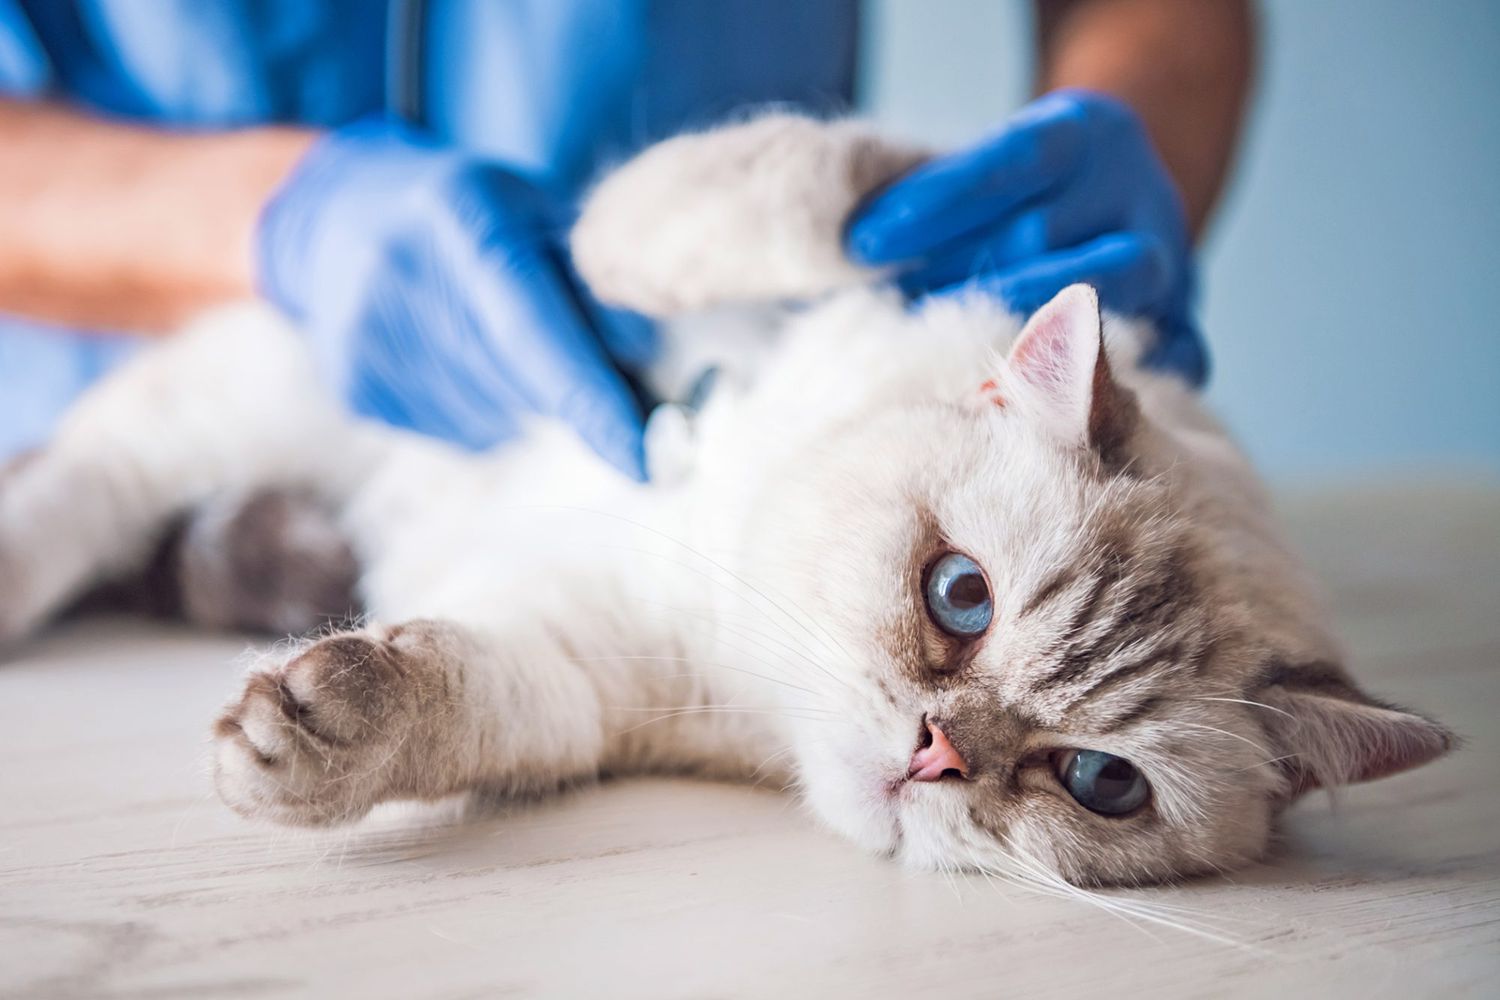 Emergency Vet Services for Pets: What You Need to Know | Daily Paws